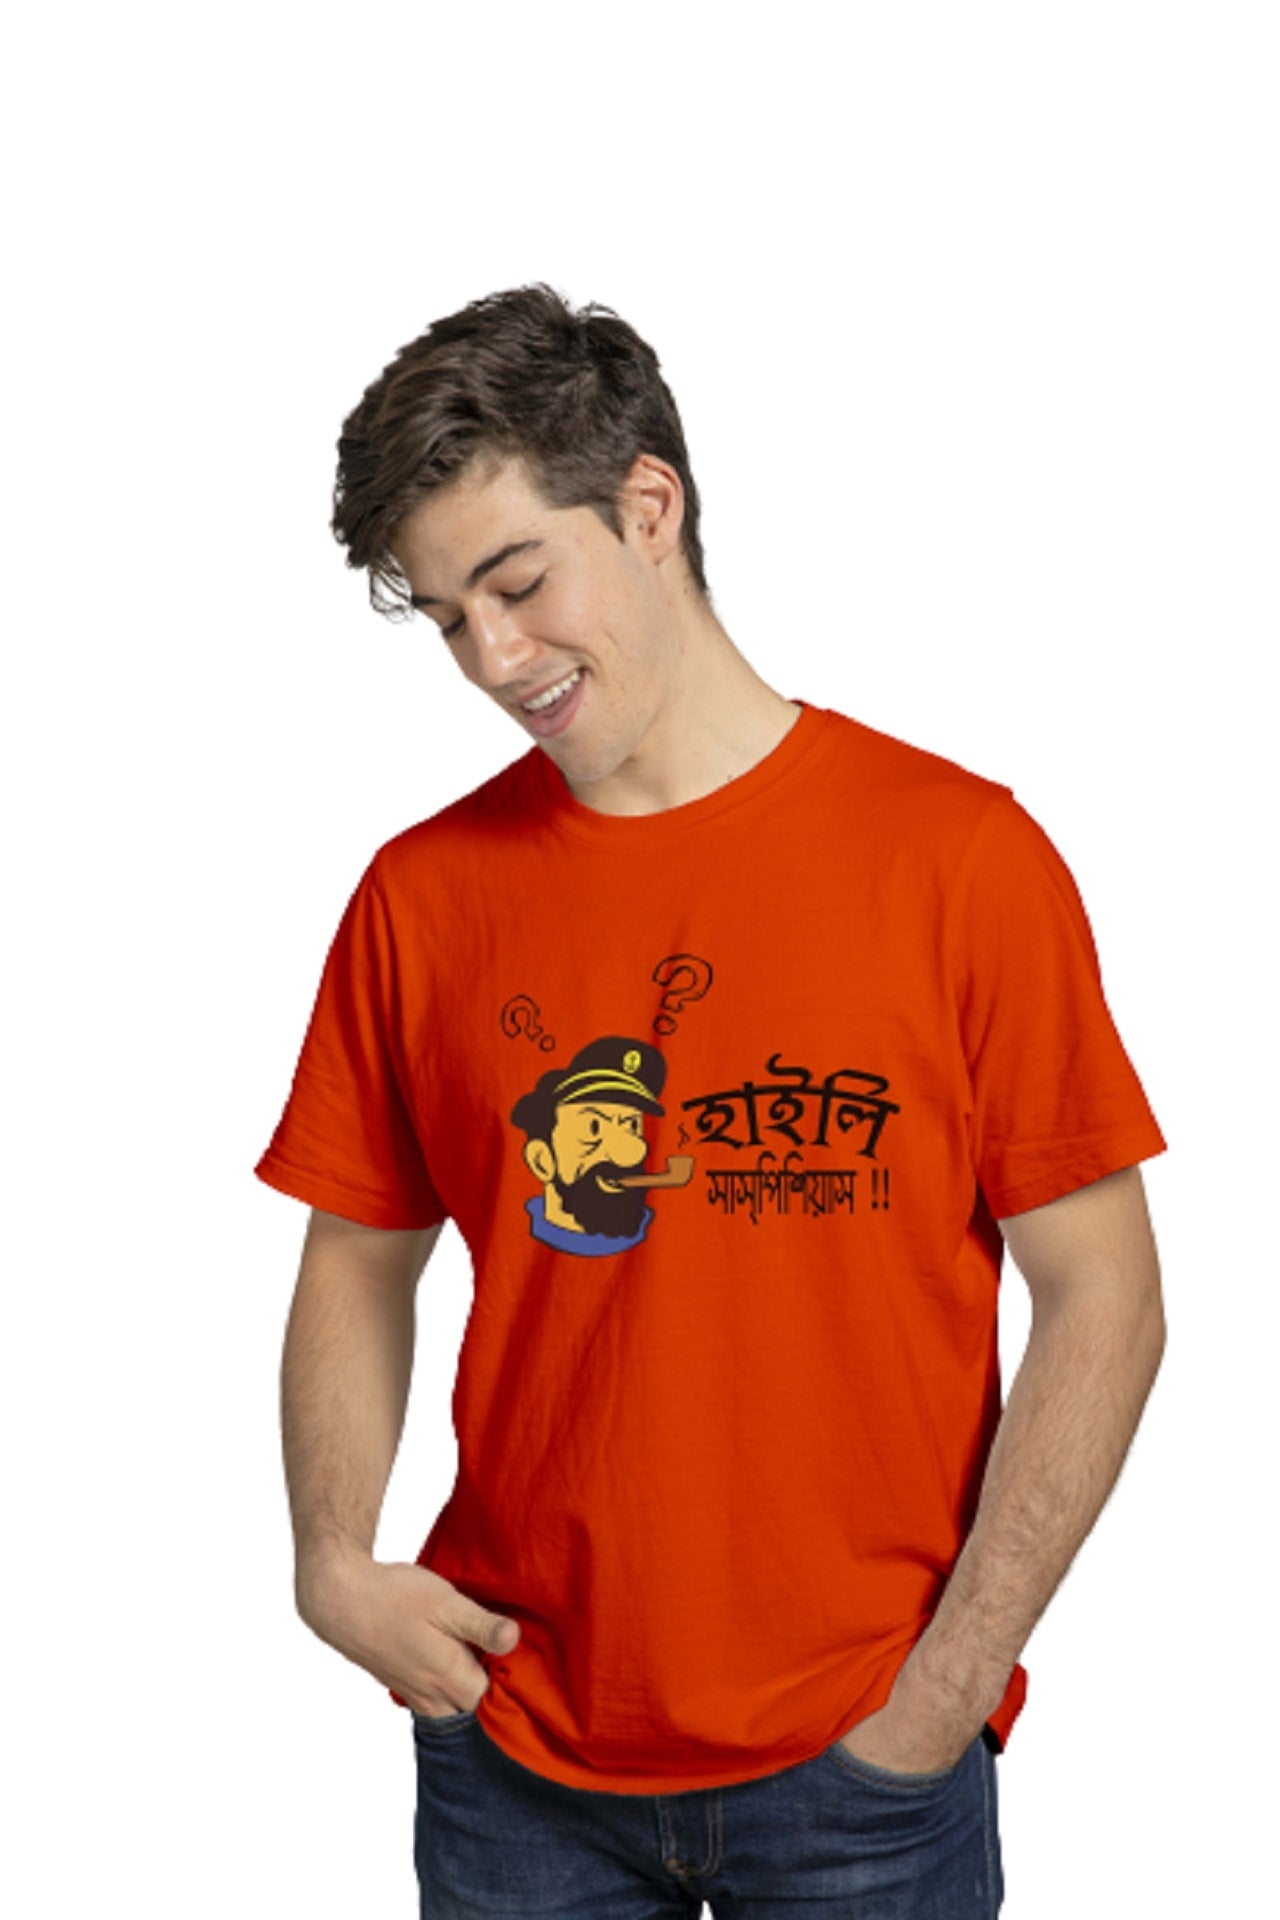 Best Quality Bengali T Shirt Online in India